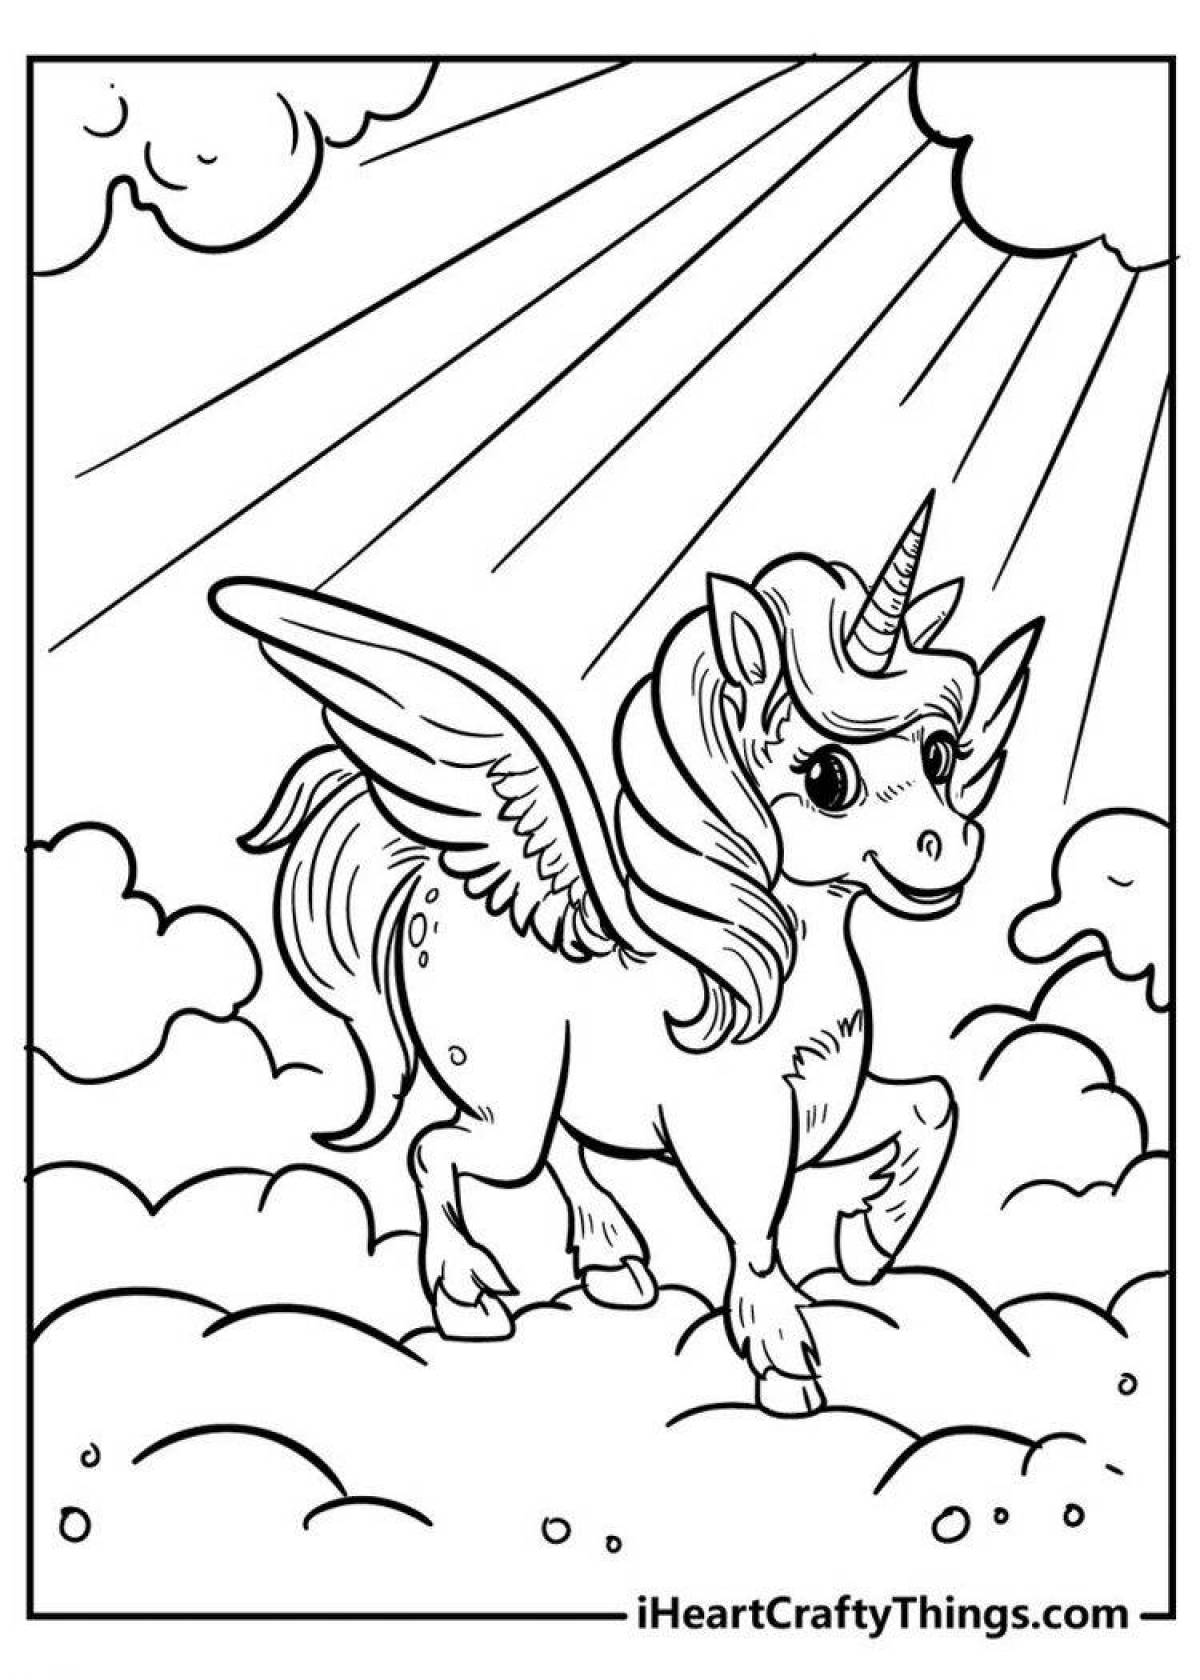 Fabulous unicorn coloring book for kids 3-4 years old